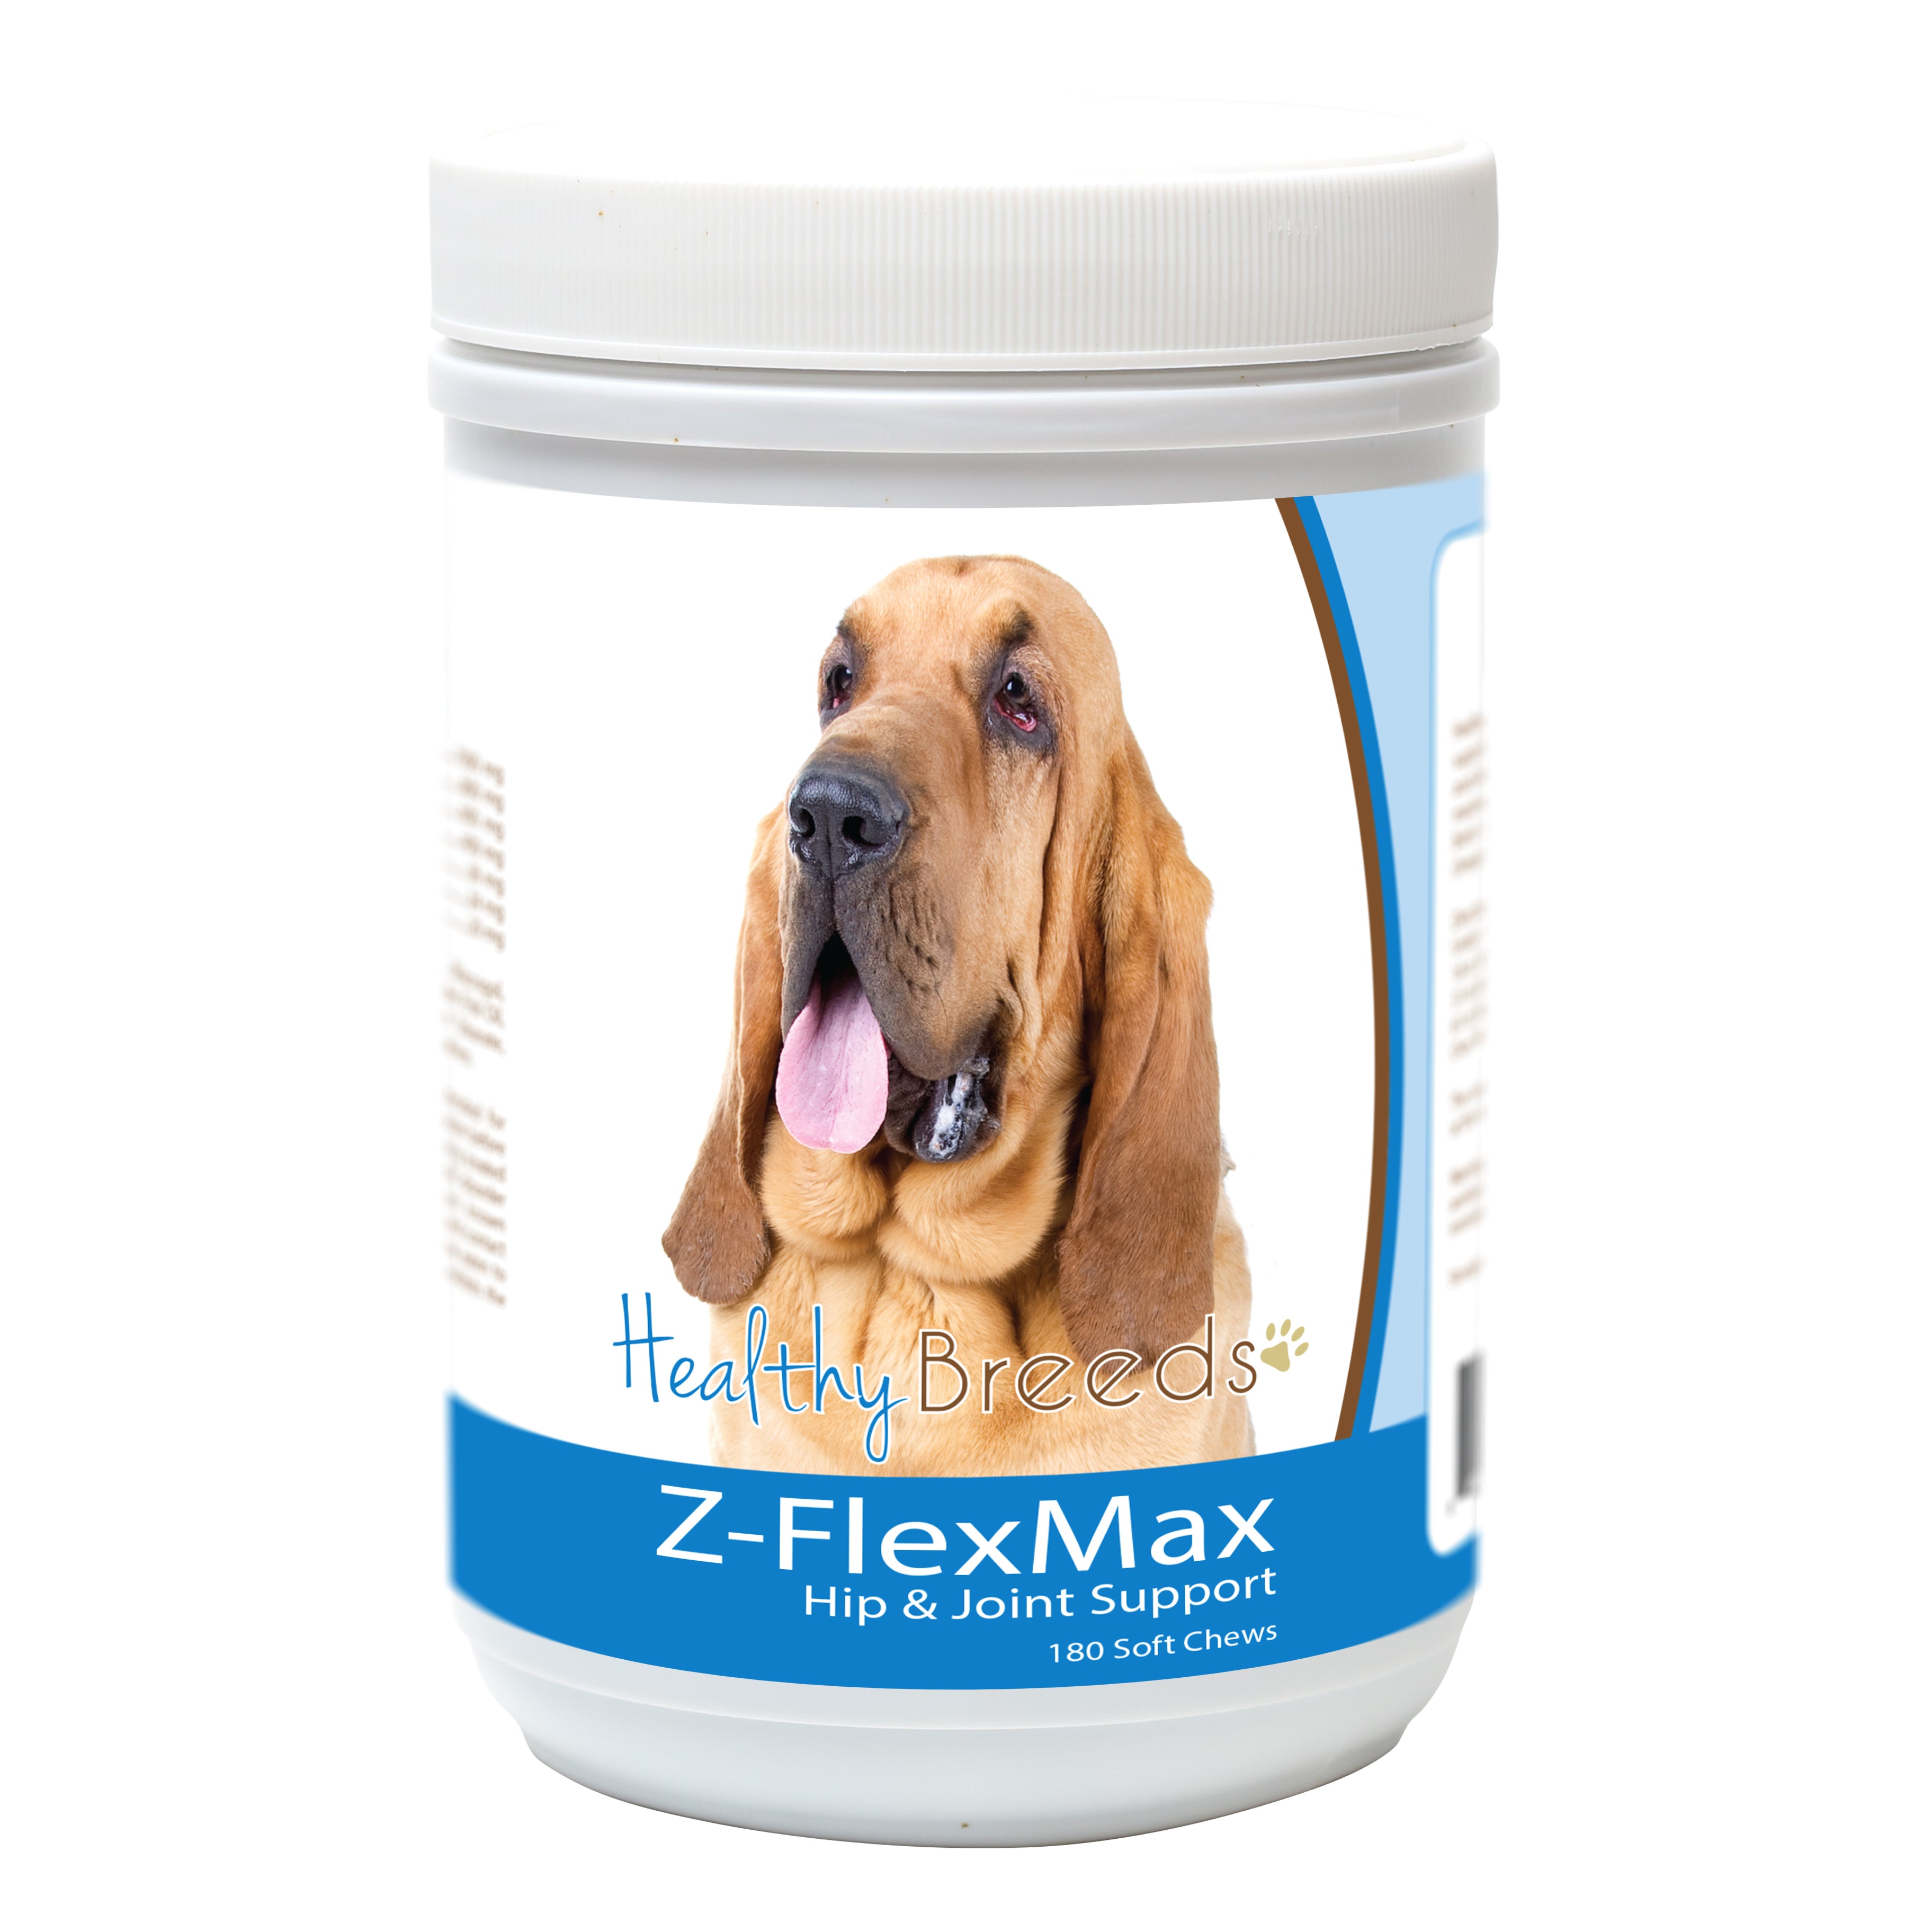 Bloodhound Z-Flex Max Dog Hip and Joint Support 180 Count